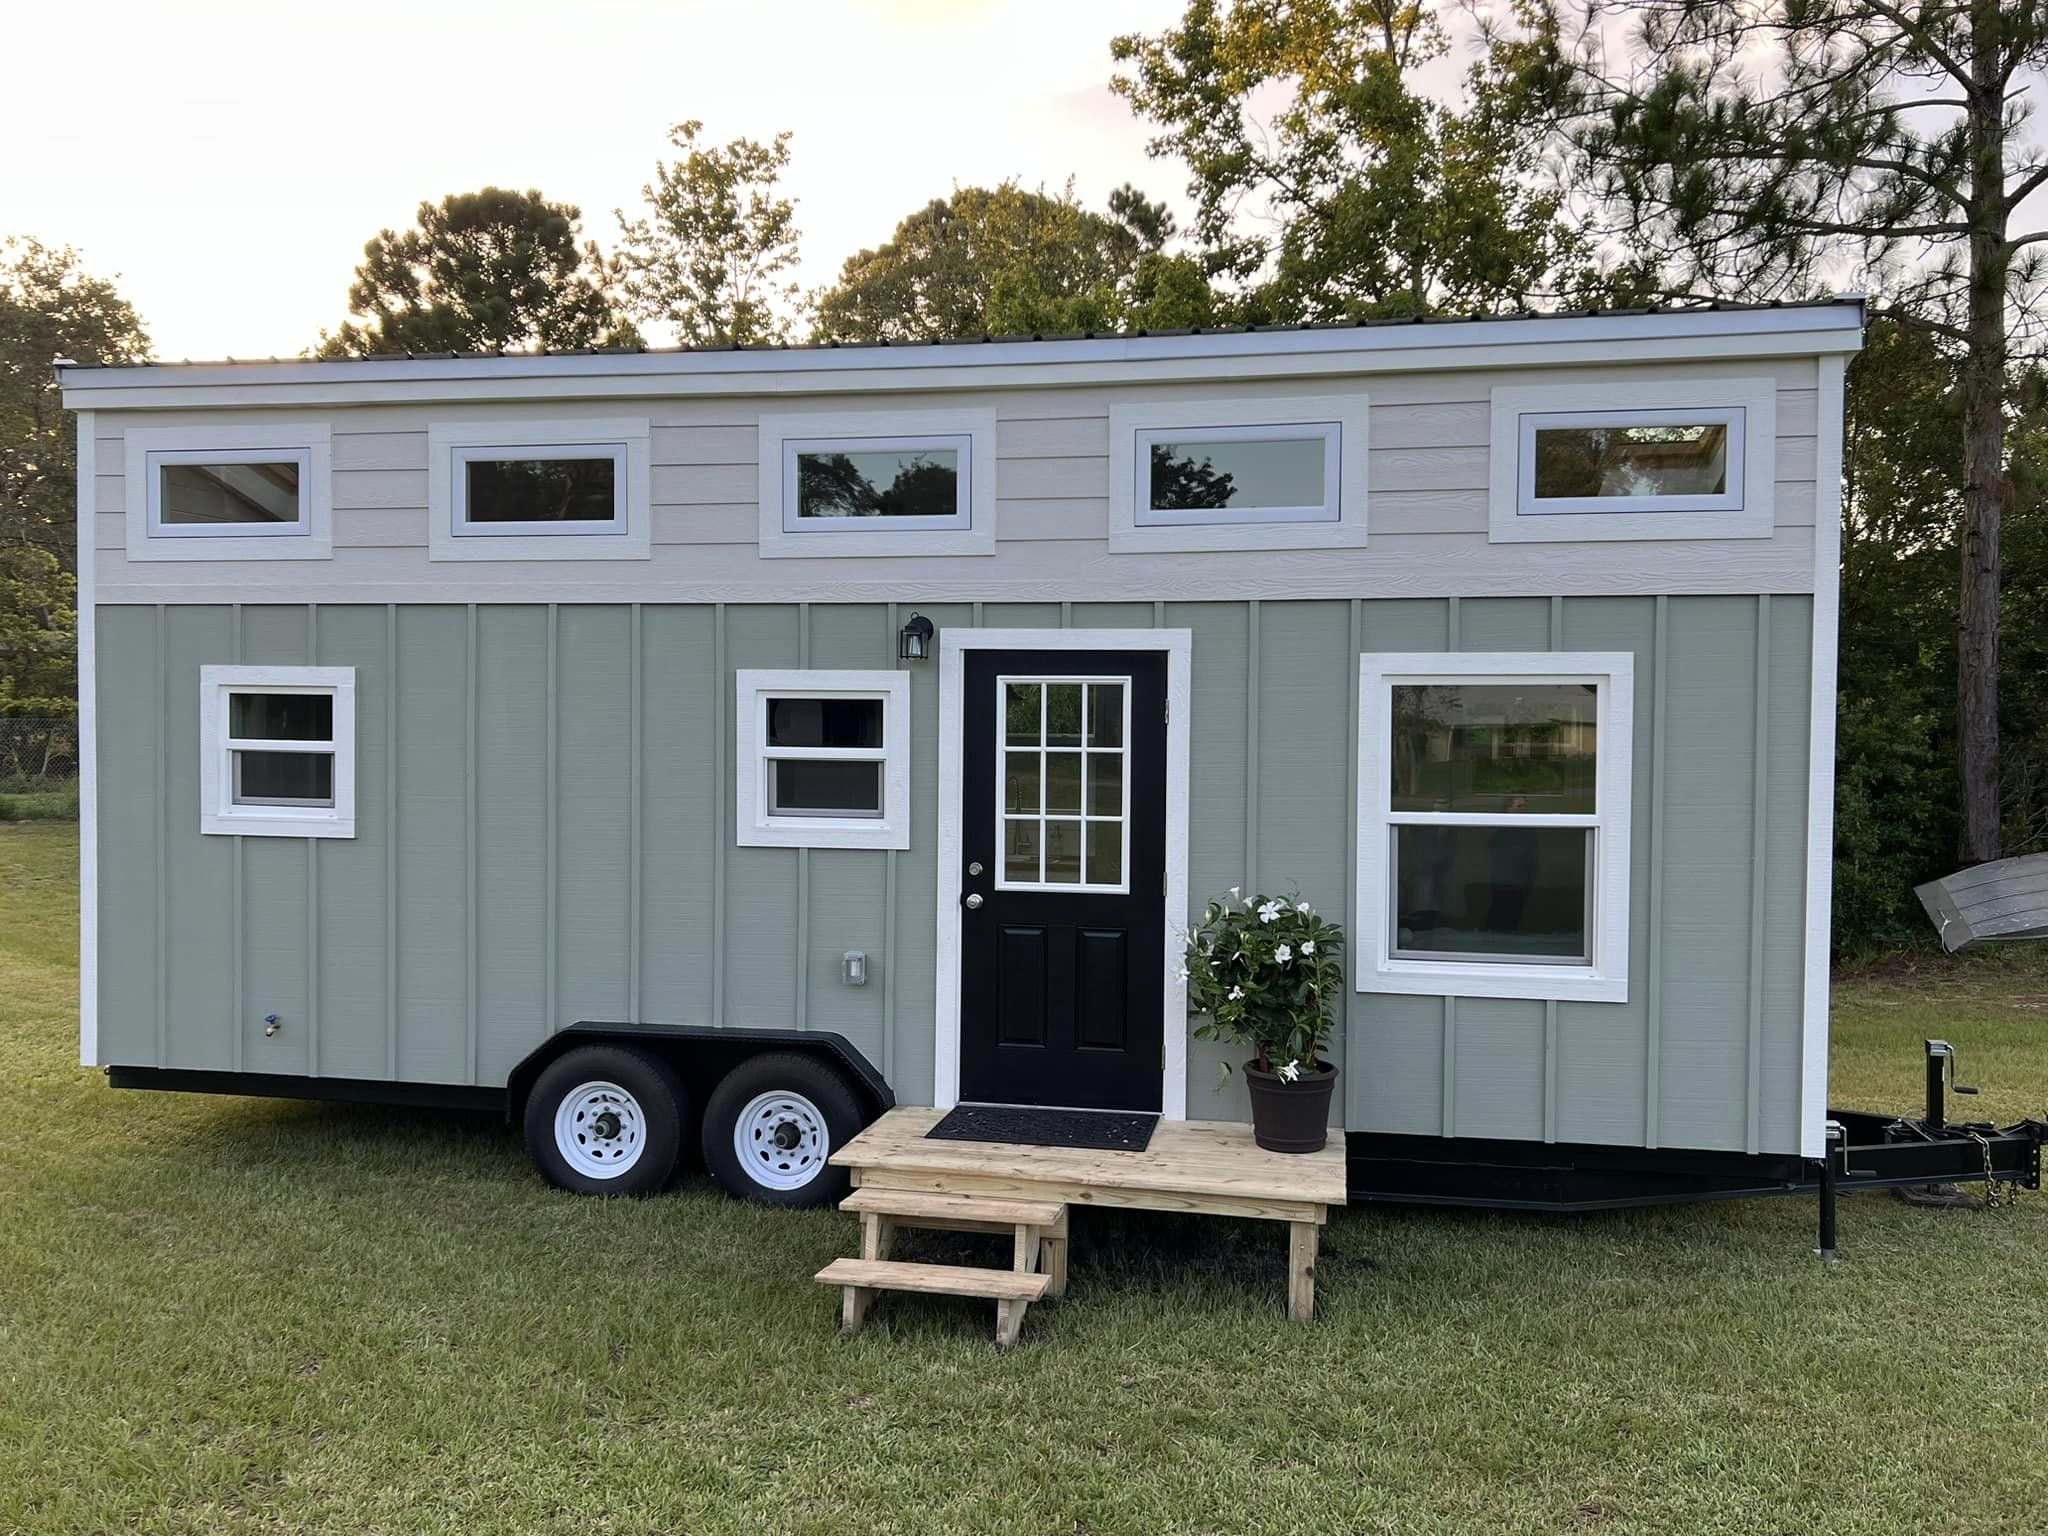 This 26-Foot Tiny House Has a Spacious Main Floor Bedroom and a ...